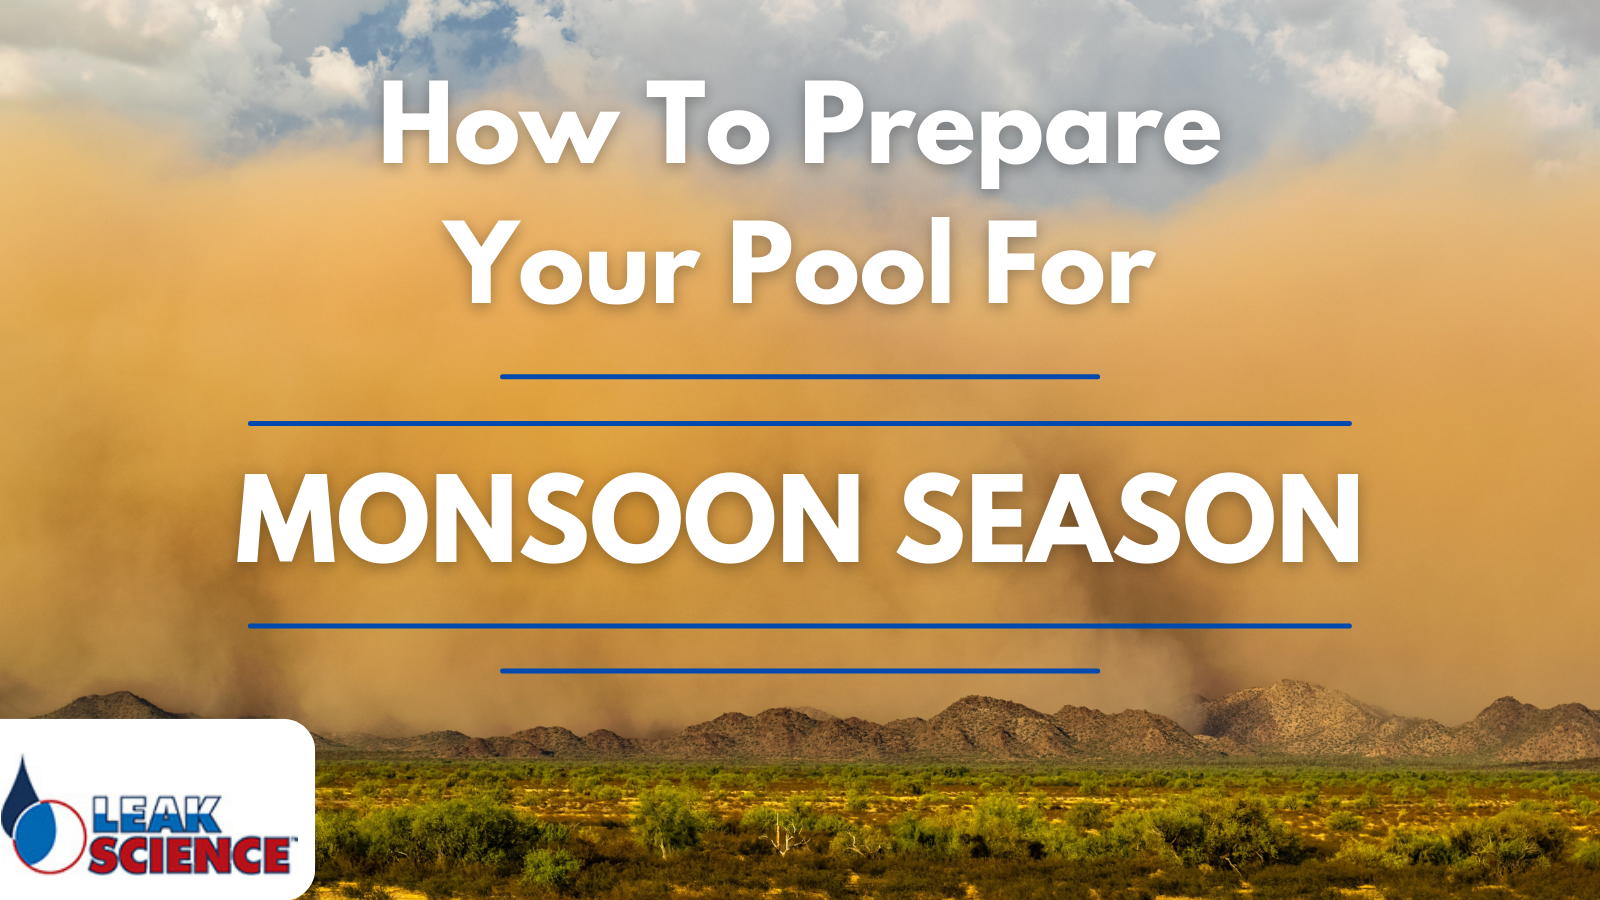 How to Prepare Your Pool for Monsoon Season